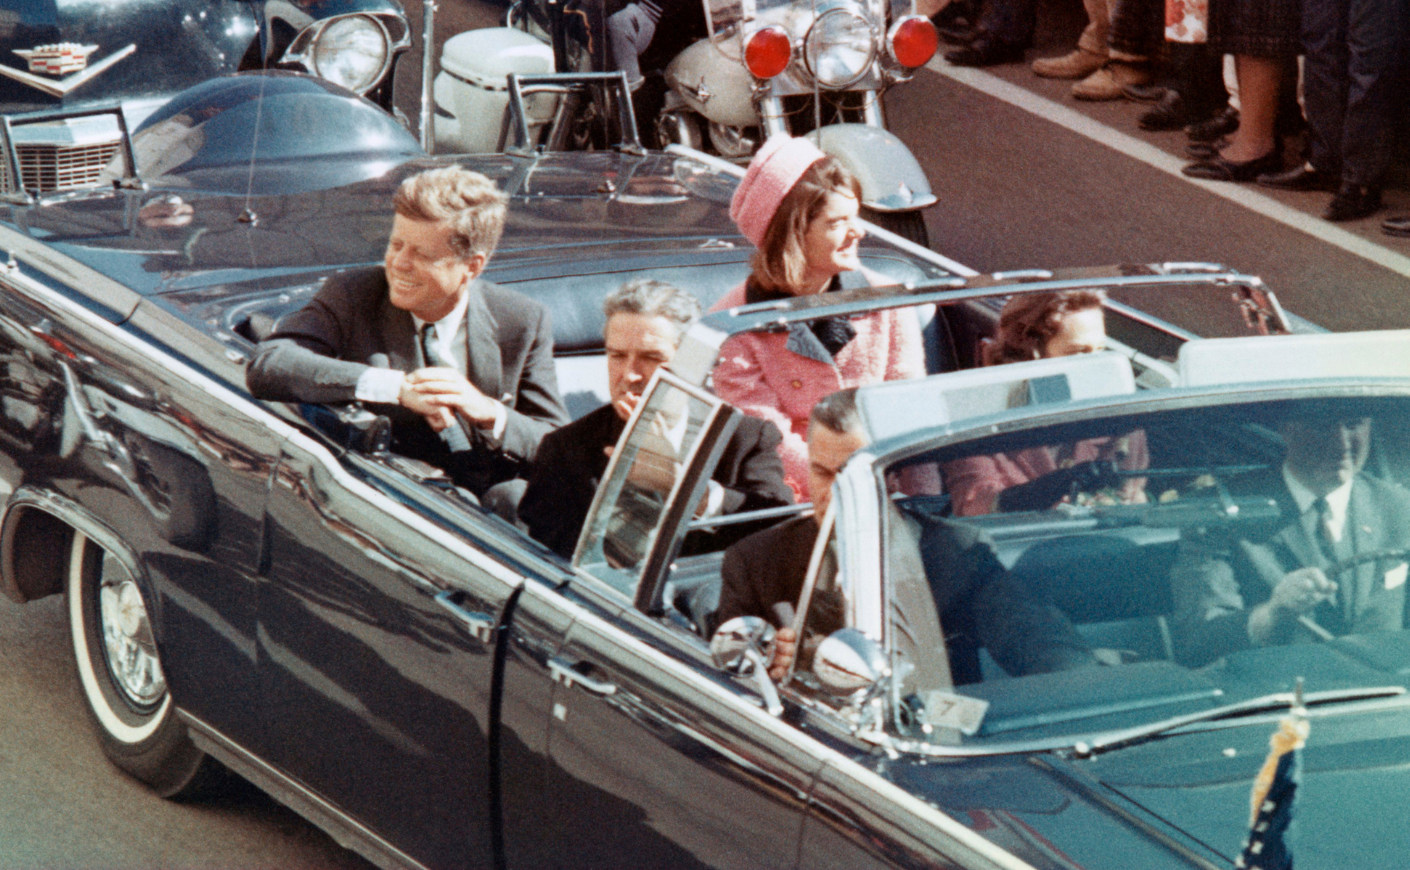 John F Kennedy and Jackie Kennedy in the limousine in Dallas just before his assassination